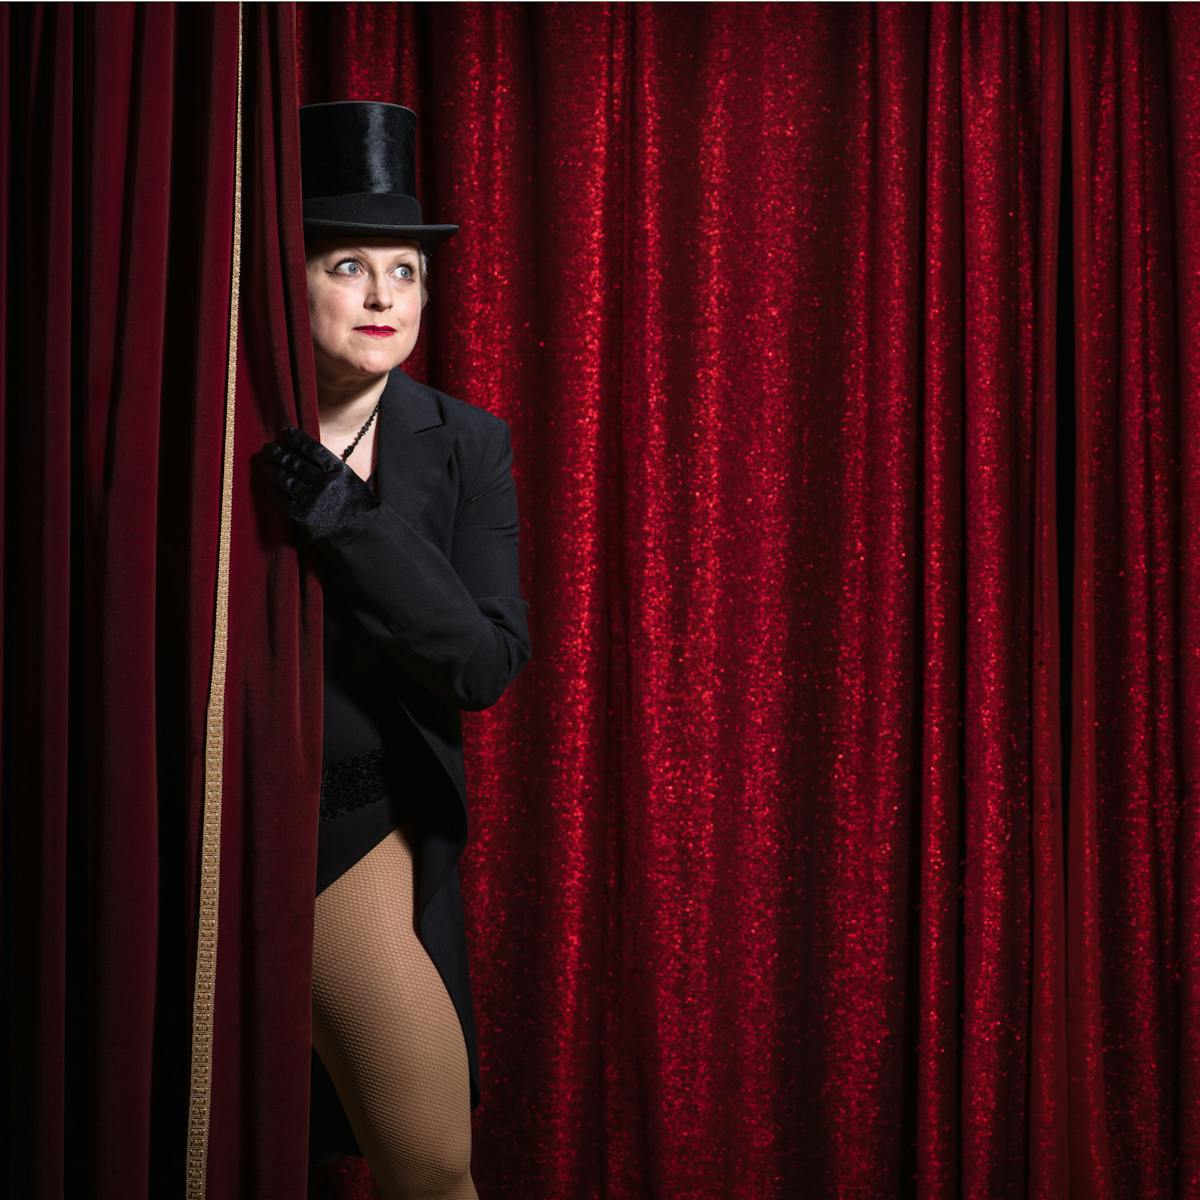 Photograph of a woman dressed in a top hat and tails peeping around the red curtain on a theatre stage. Behind her is another glittering red curtain.